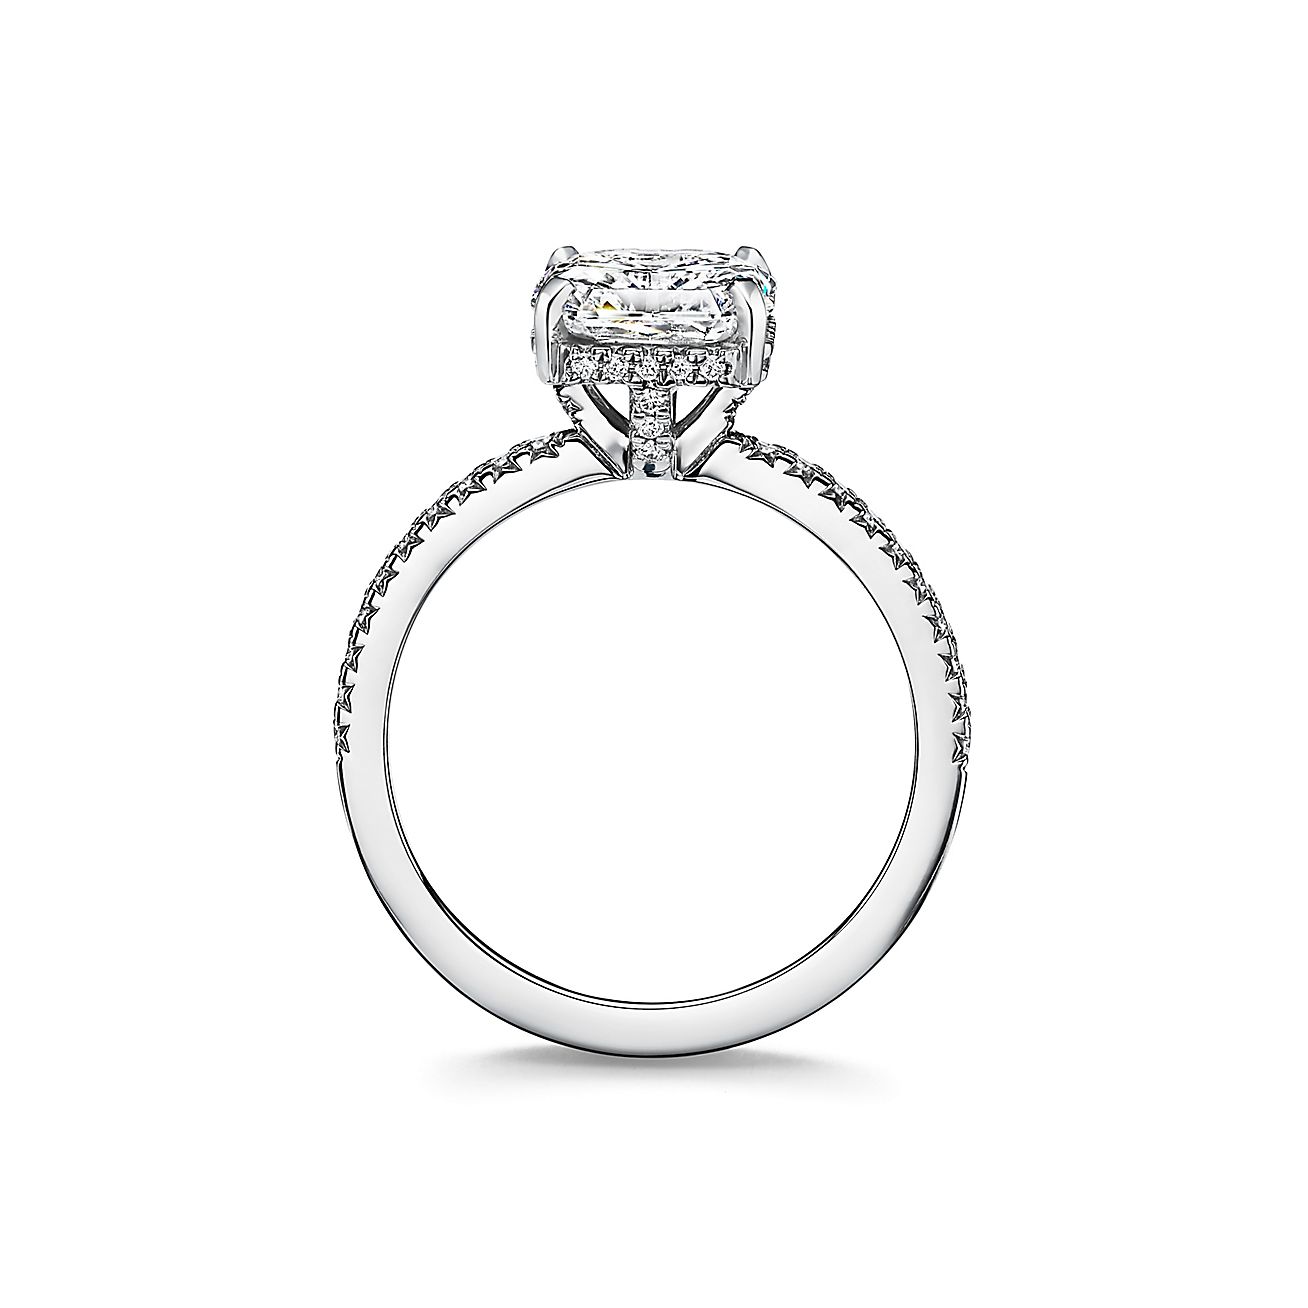 Overlappen dennenboom driehoek Tiffany True® Engagement Ring with a Tiffany True® Diamond and a Platinum  Diamond Band